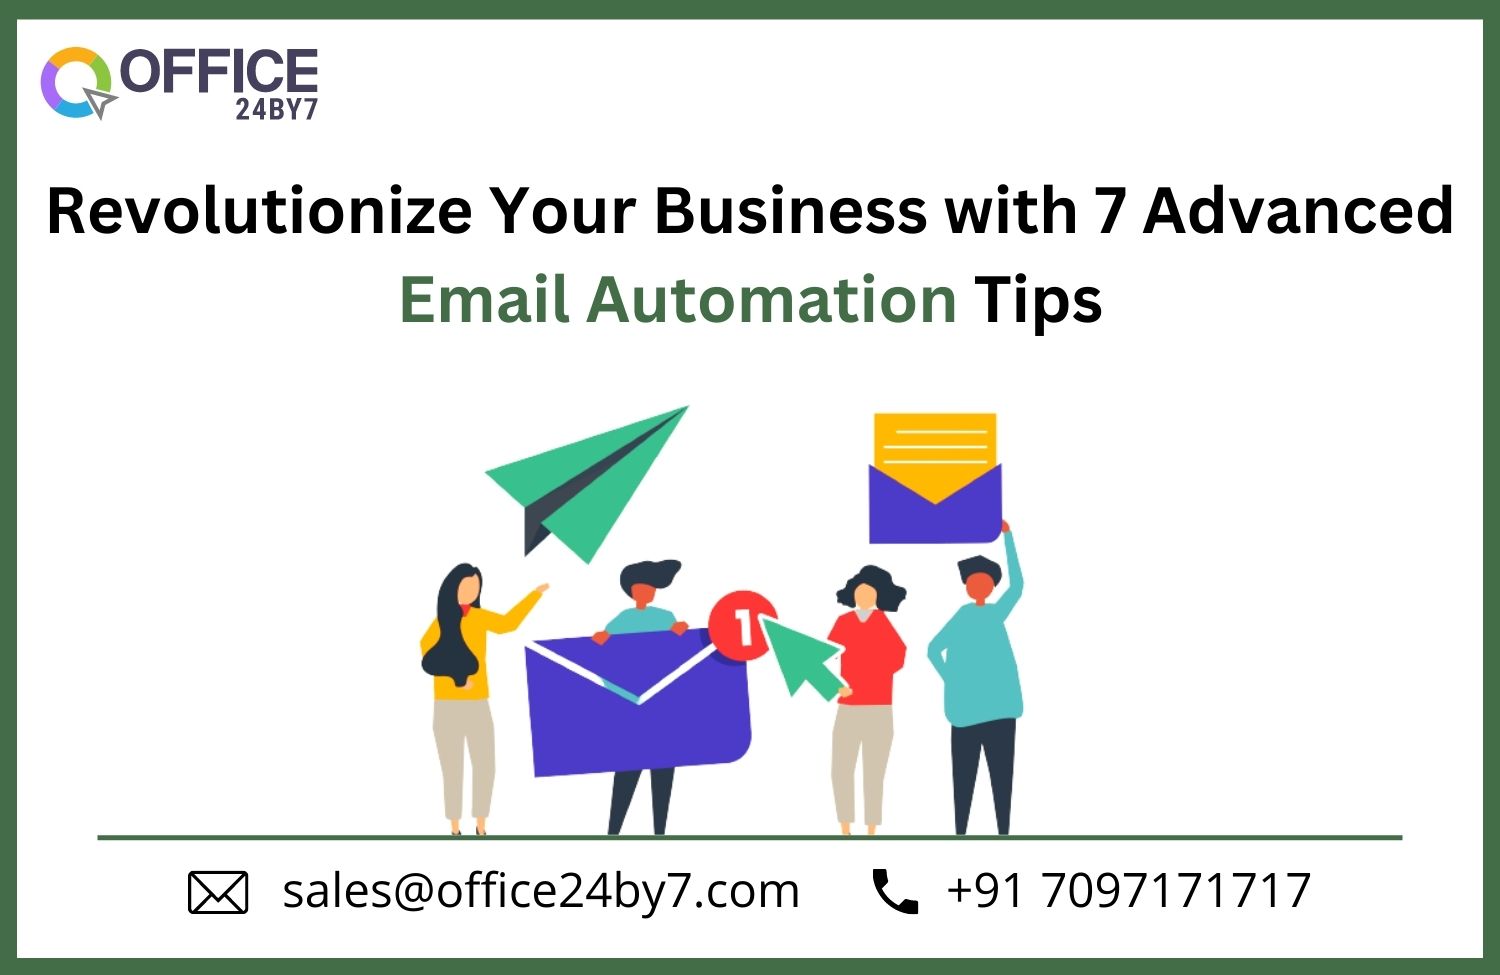 Revolutionize Your Business with 7 Advanced Email Automation Tips